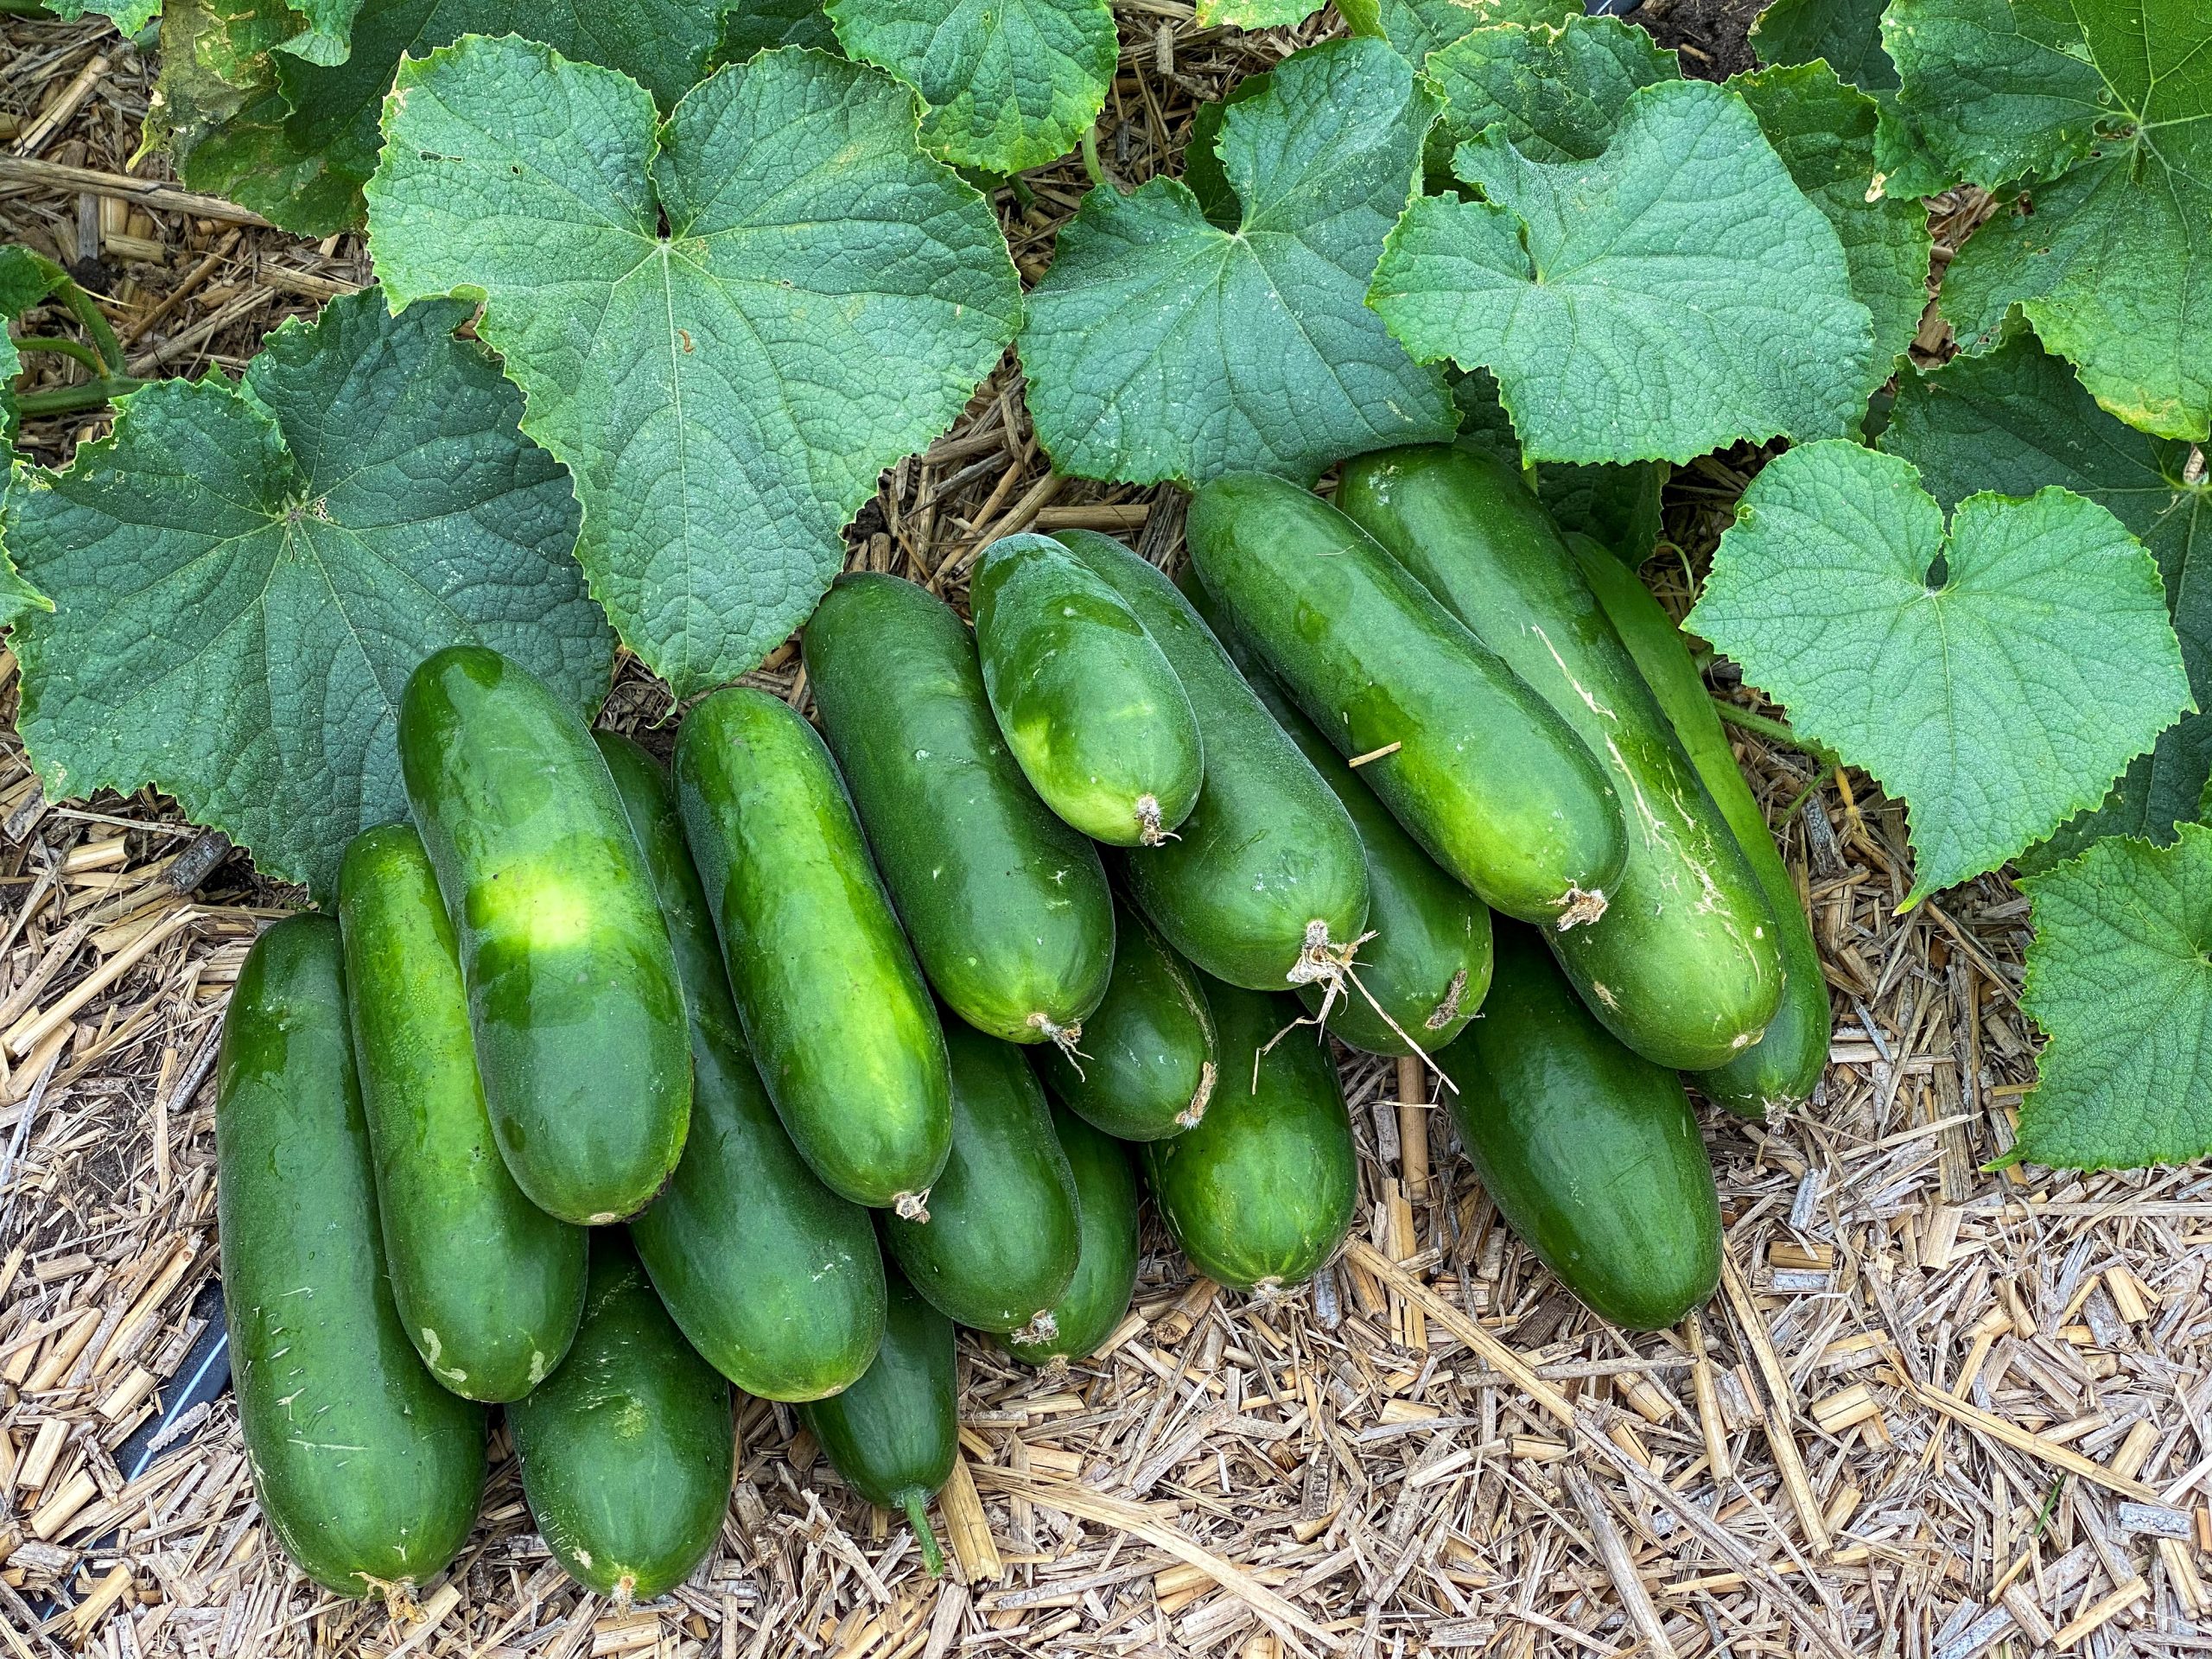 Cucumbers (Photo: Iowa State University Extension and Outreach)